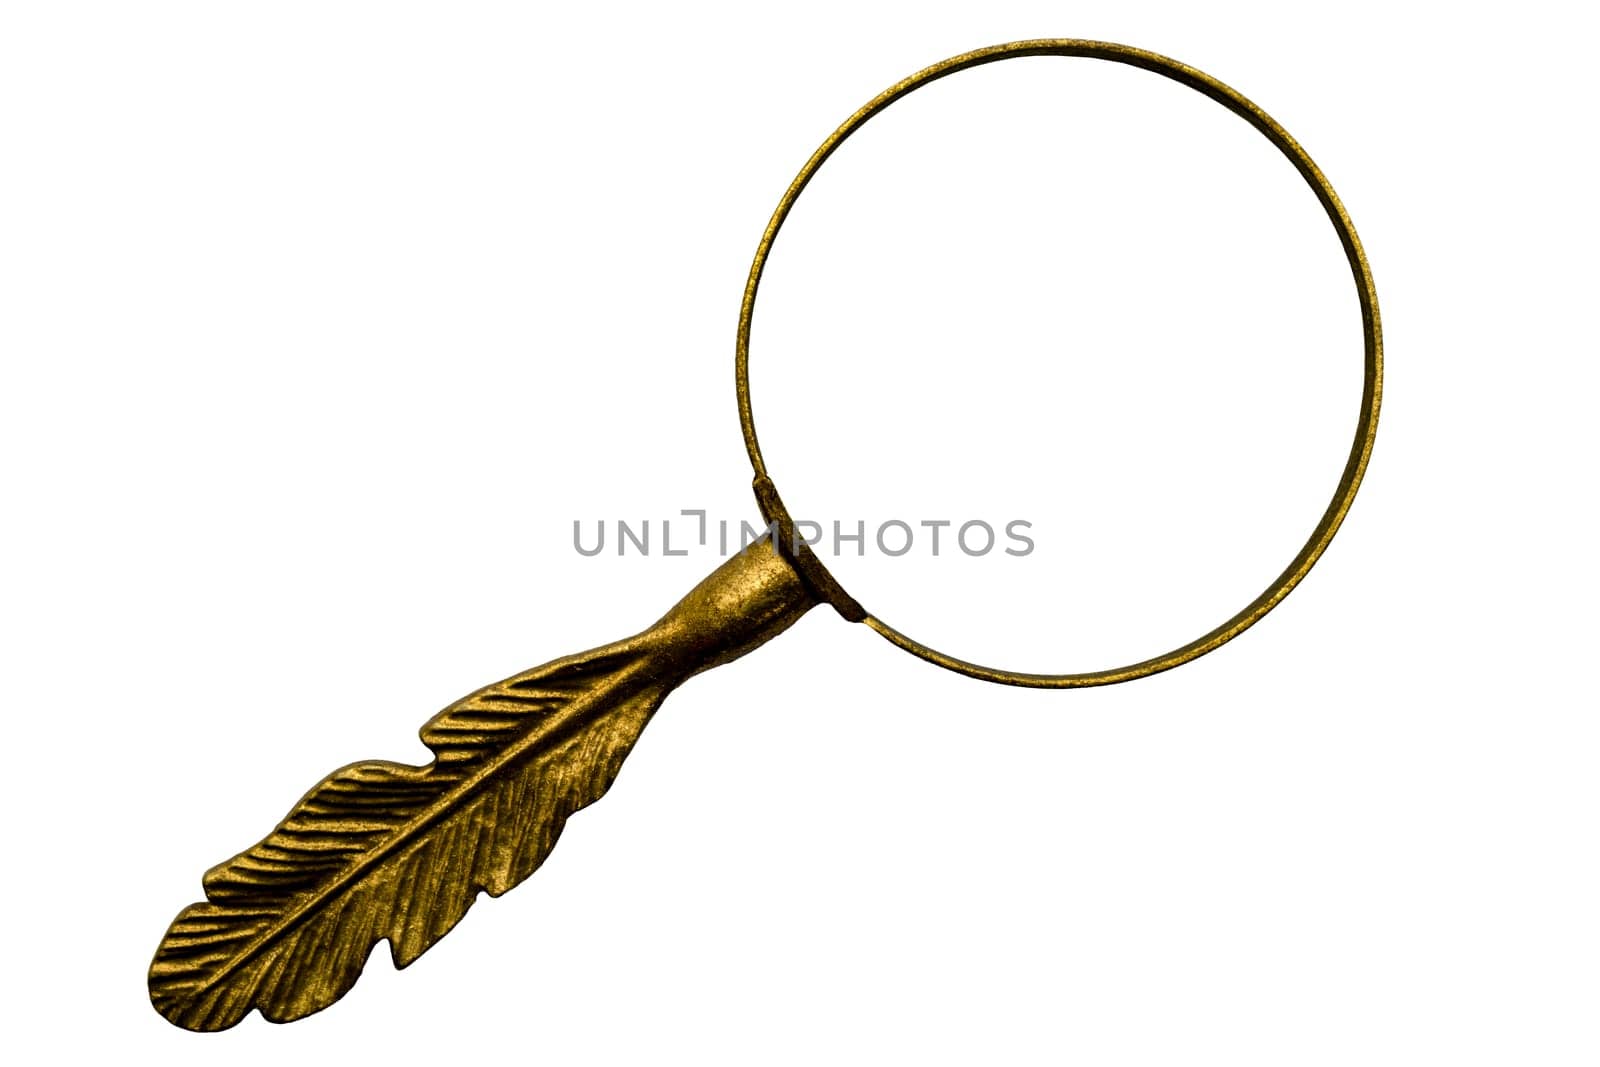 Vintage antique magnifying glass with a brass handle isolated on white, cut out in center. High quality photo